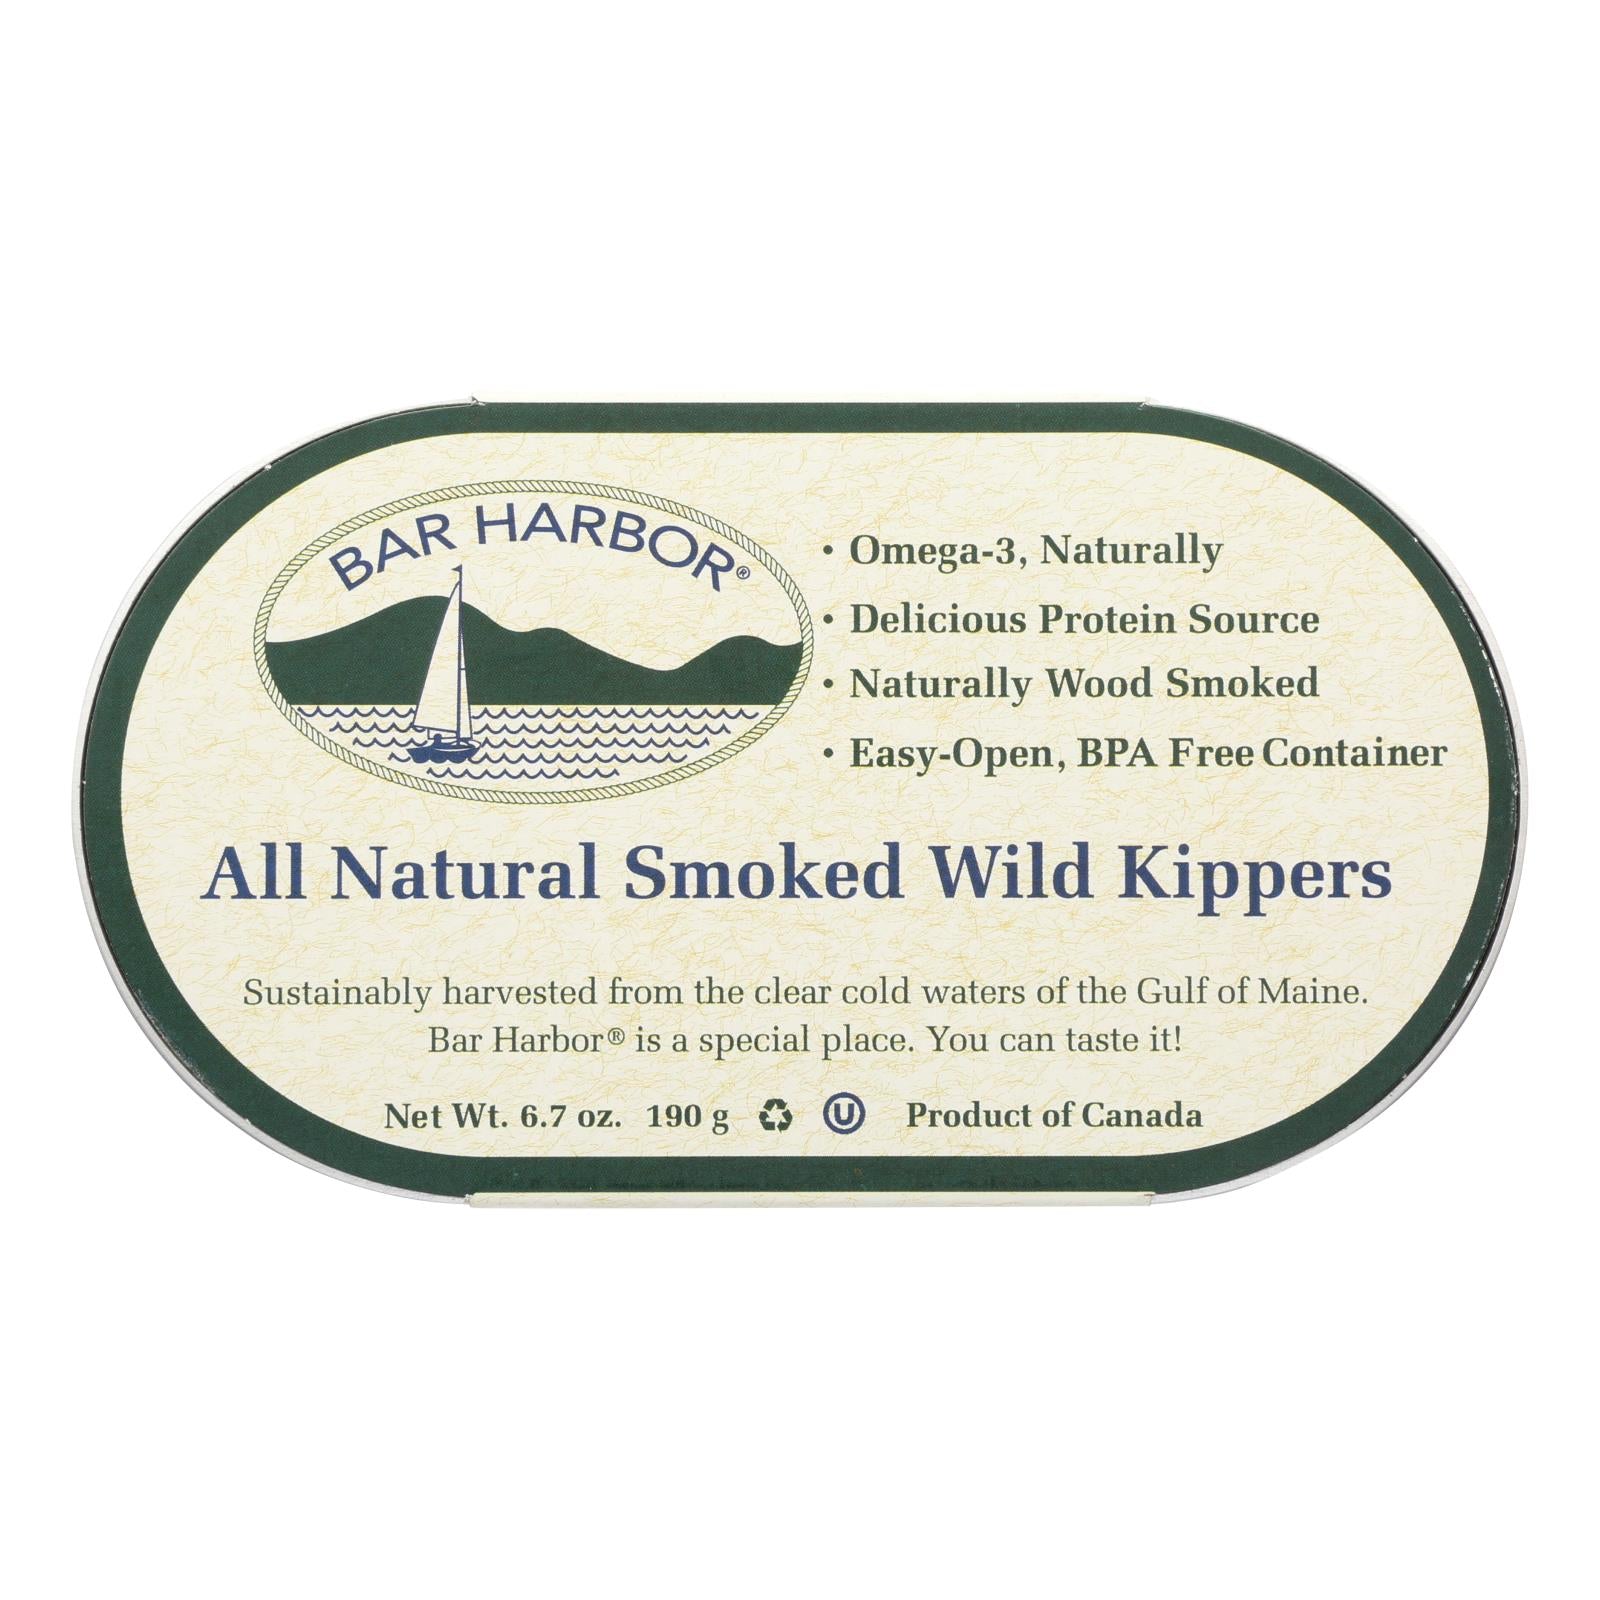 Bar Harbor, Bar Harbor - Smoked Wild Kippers - Case of 12 - 6.7 oz. (Pack of 12)